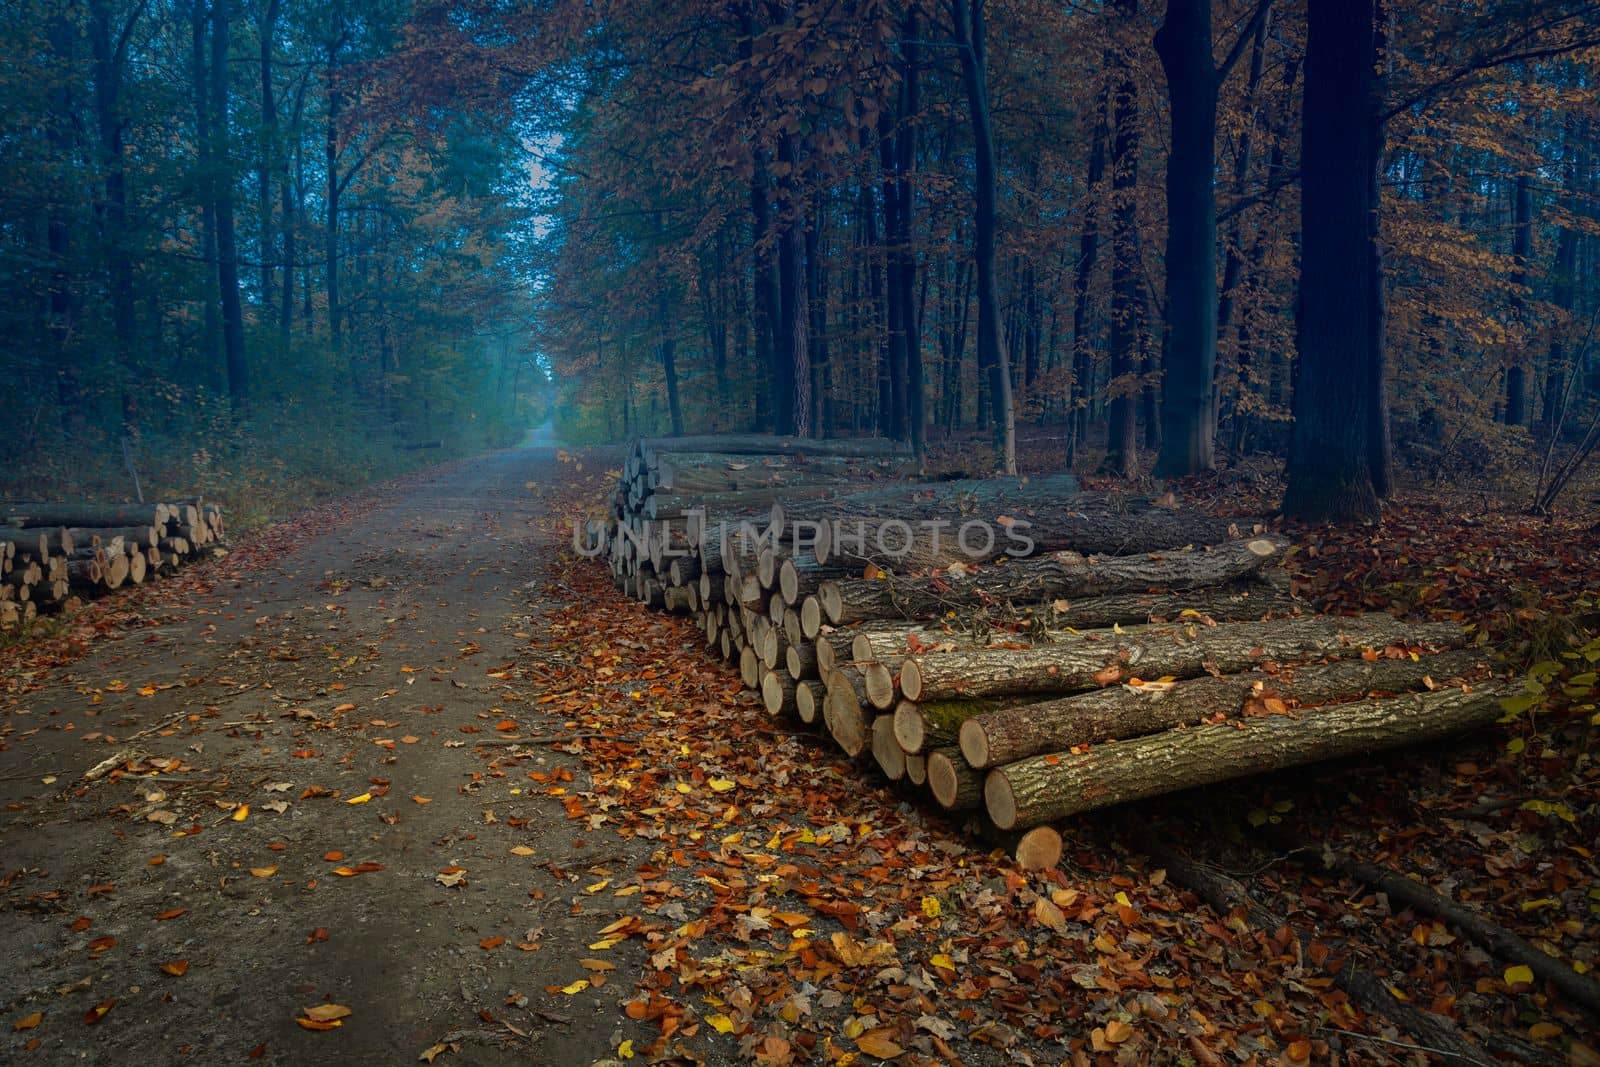 Wood storage by the road in the autumn forest, October evening in eastern Poland